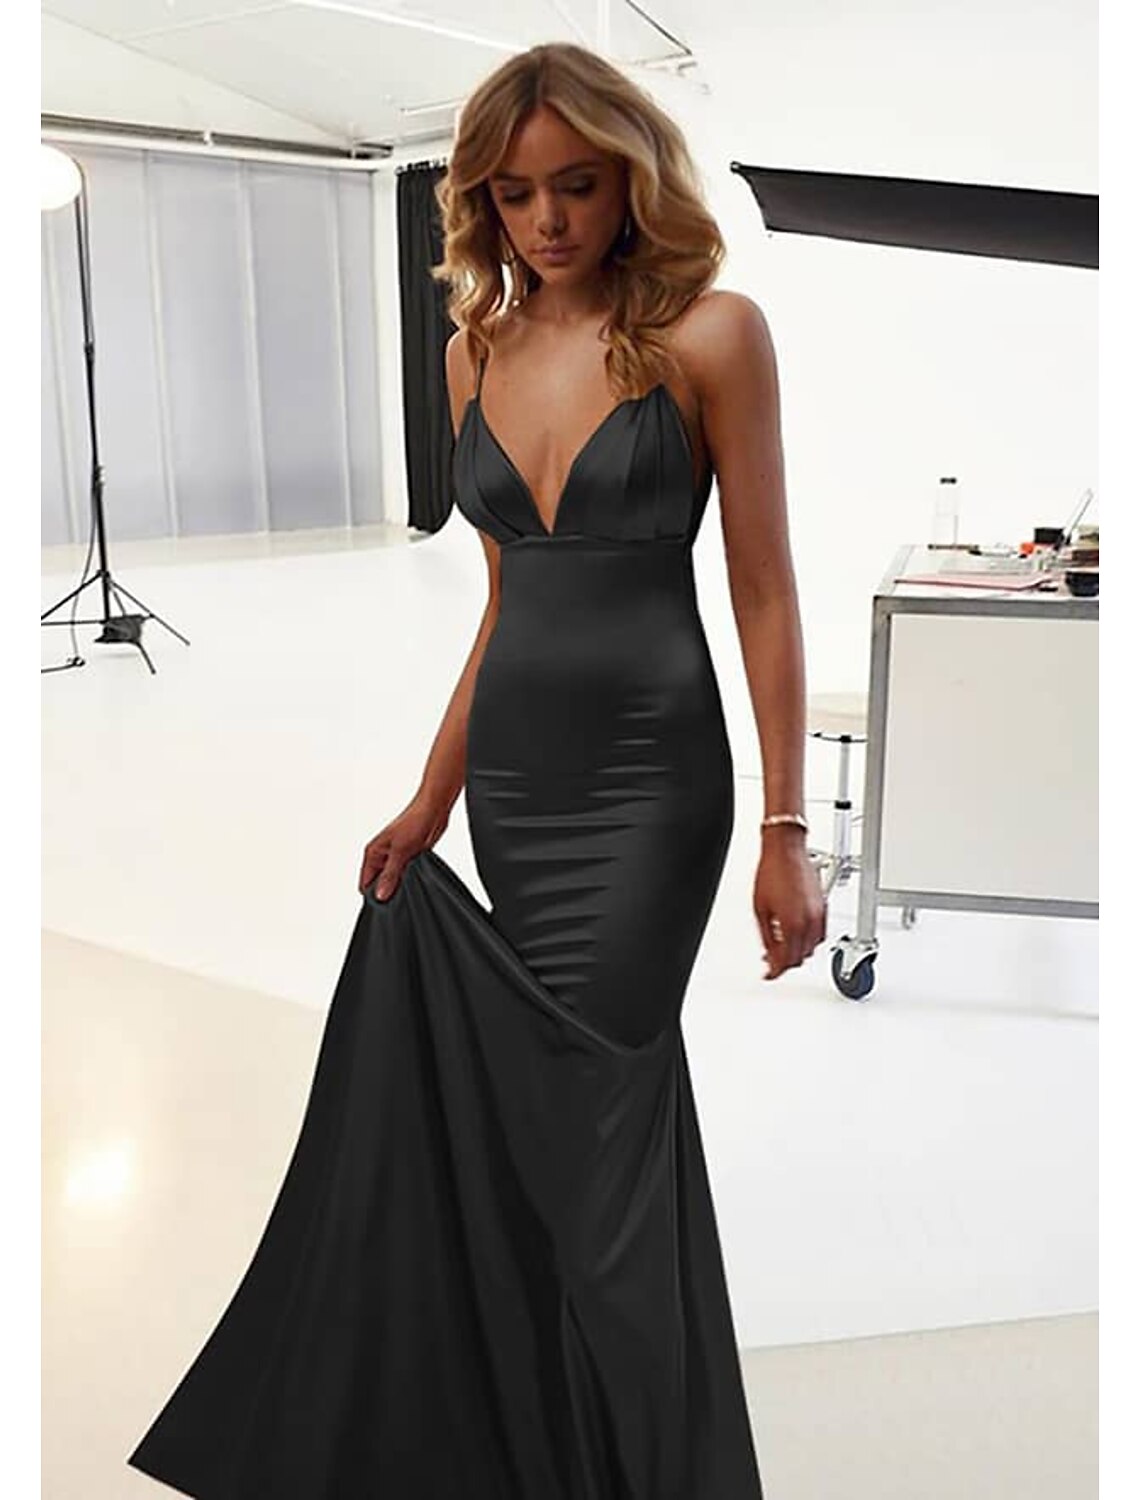 Mermaid / Trumpet Wedding Guest Dresses Sexy Dress Prom Black Tie Gala Floor Length Sleeveless Spaghetti Strap Cotton Backless with Ruched